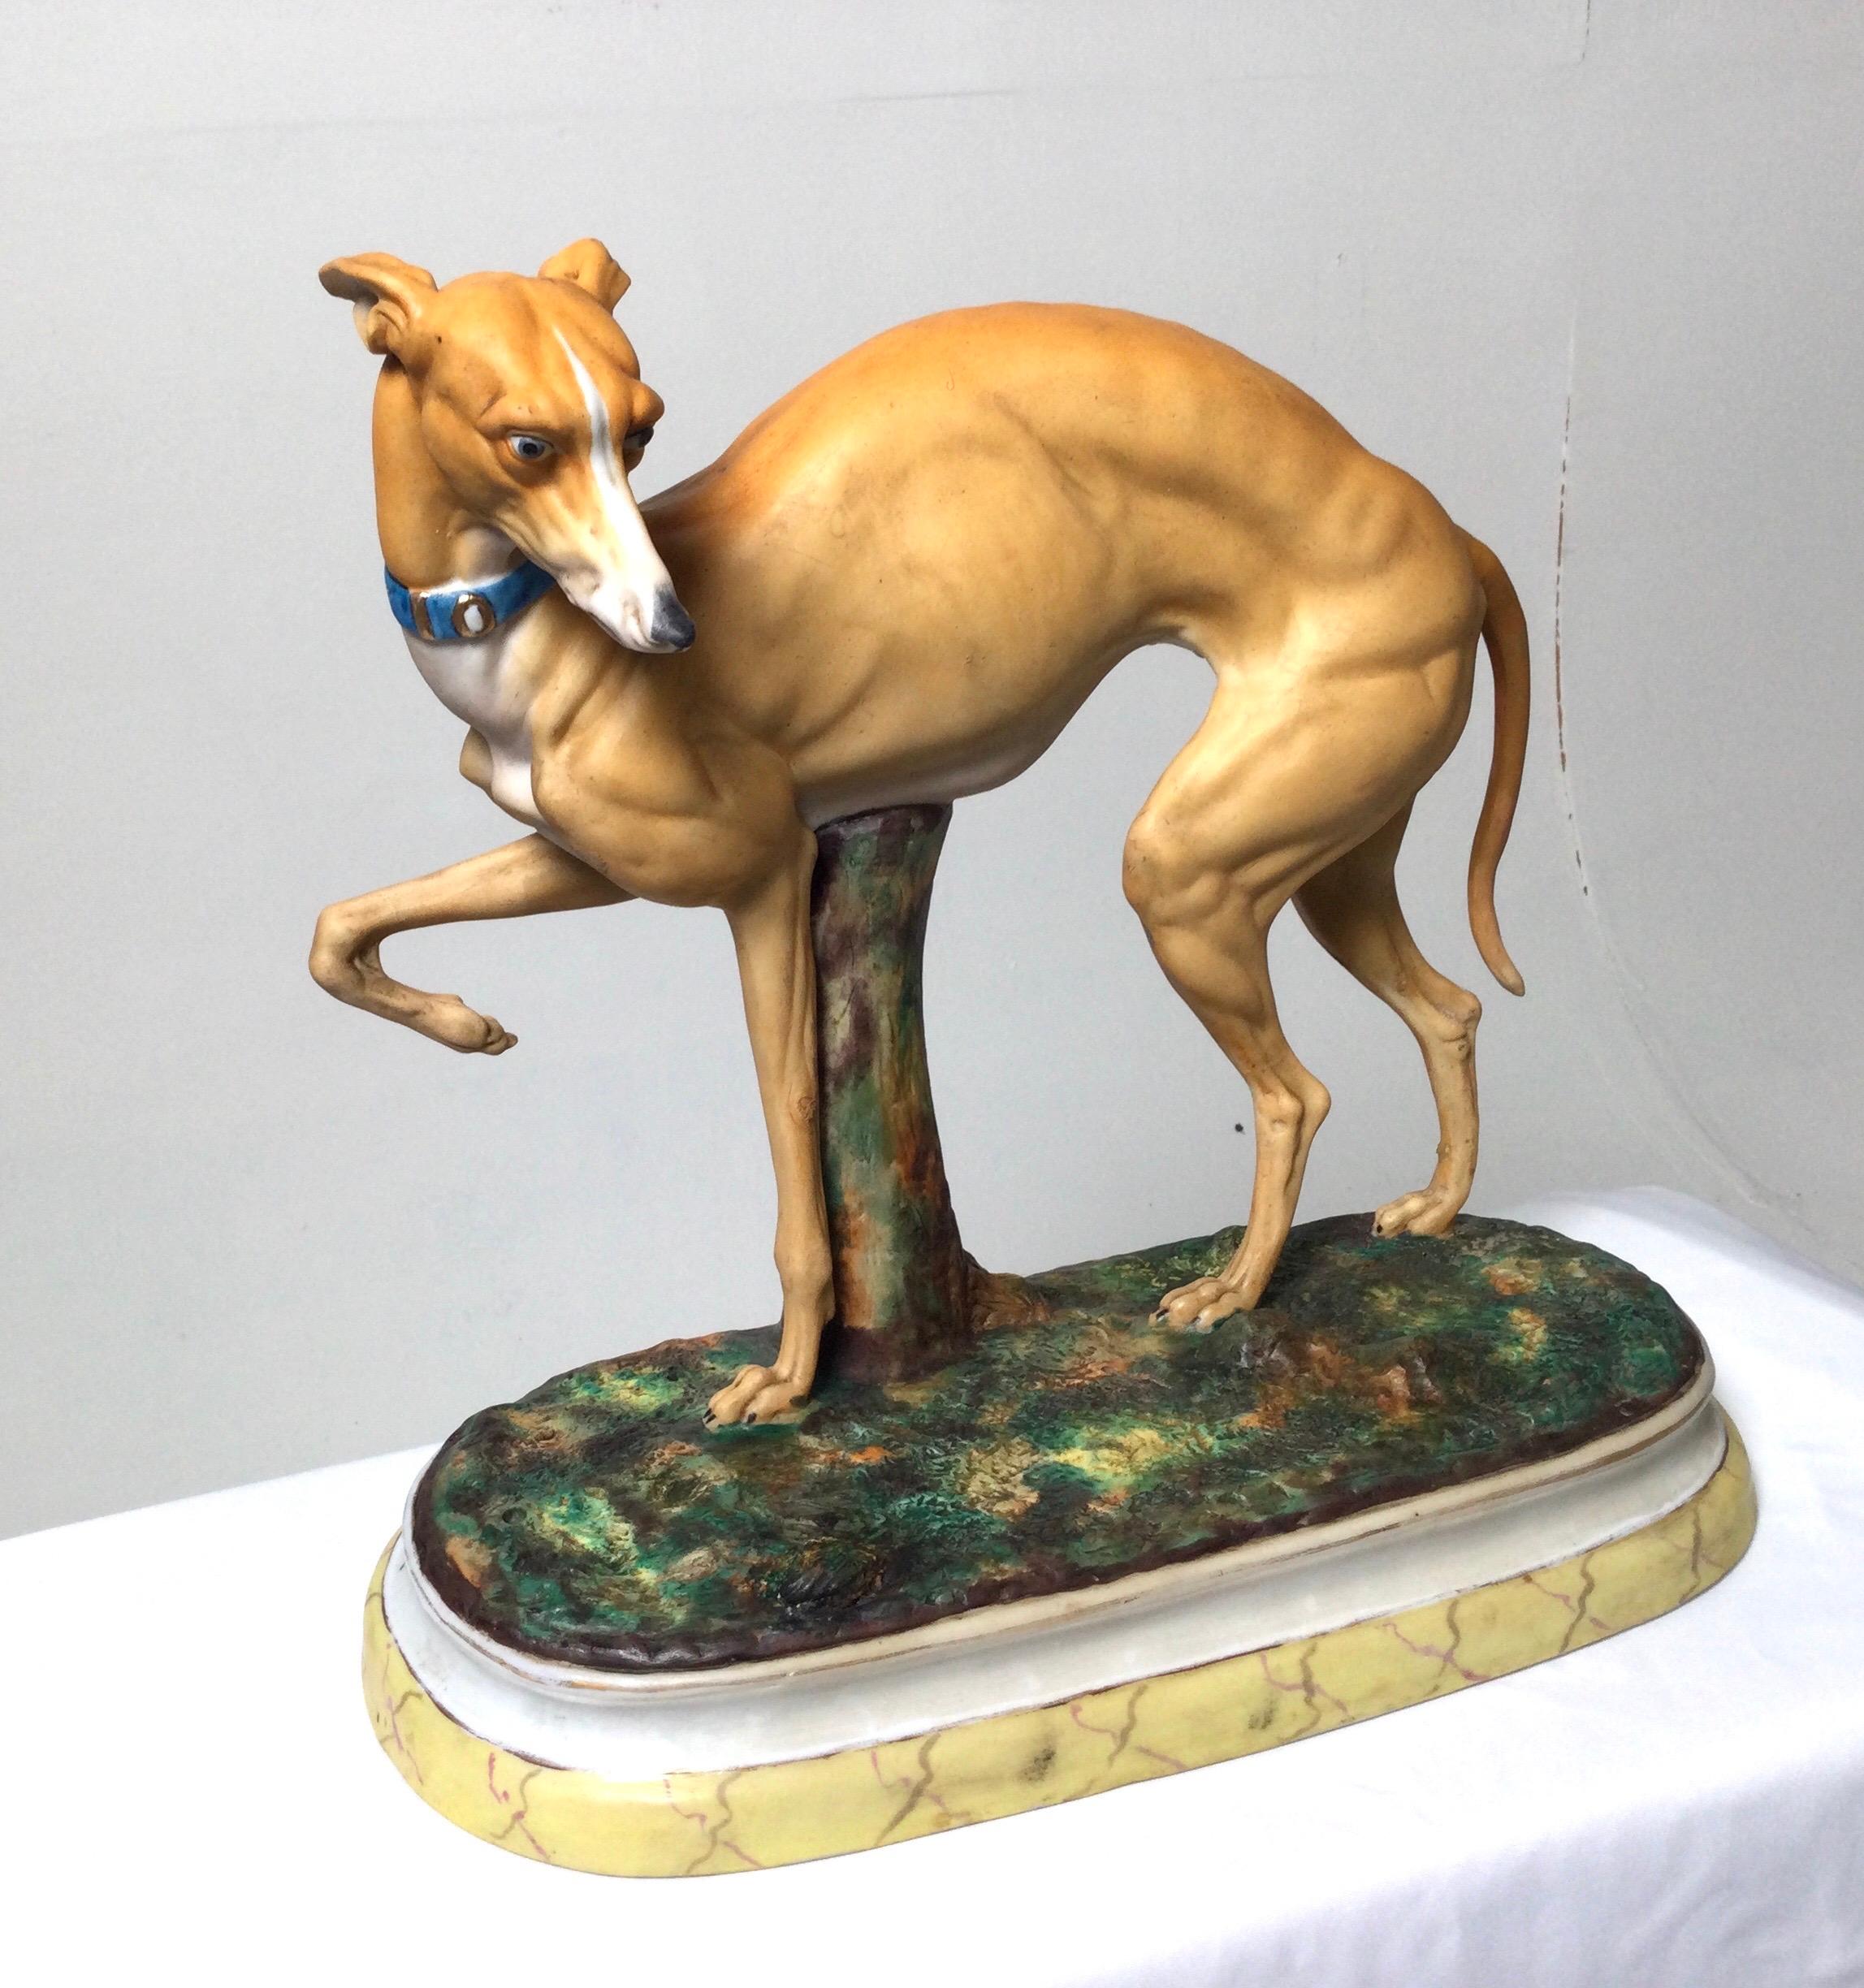 Graceful porcelain figure of a whippet dog. The 19th century sculpture with a hand panted bisque surface depicting dog with blue collar on a patch of variegated green and brown grass. The oval base with a yellow marble paint decoration. Beautifully